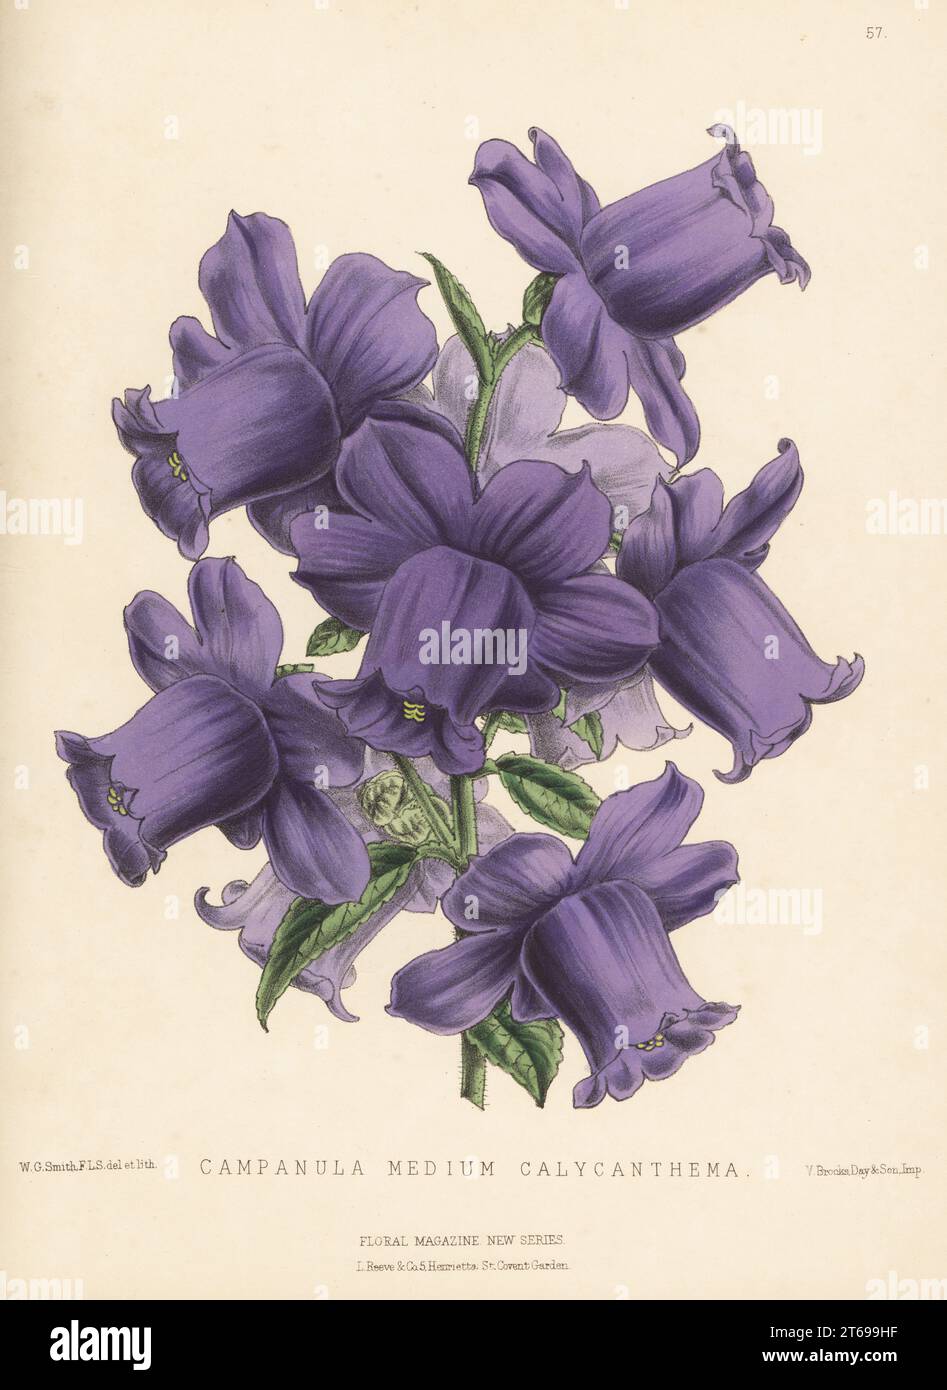 Canterbury bells, Campanula medium. Campanula medium calycanthema, a new variety raised by Waite and Burnell of Southwark Street. Handcolored botanical illustration drawn and lithographed by Worthington George Smith from Henry Honywood Dombrain's Floral Magazine, New Series, Volume 2, L. Reeve, London, 1873. Lithograph printed by Vincent Brooks, Day & Son. Stock Photo